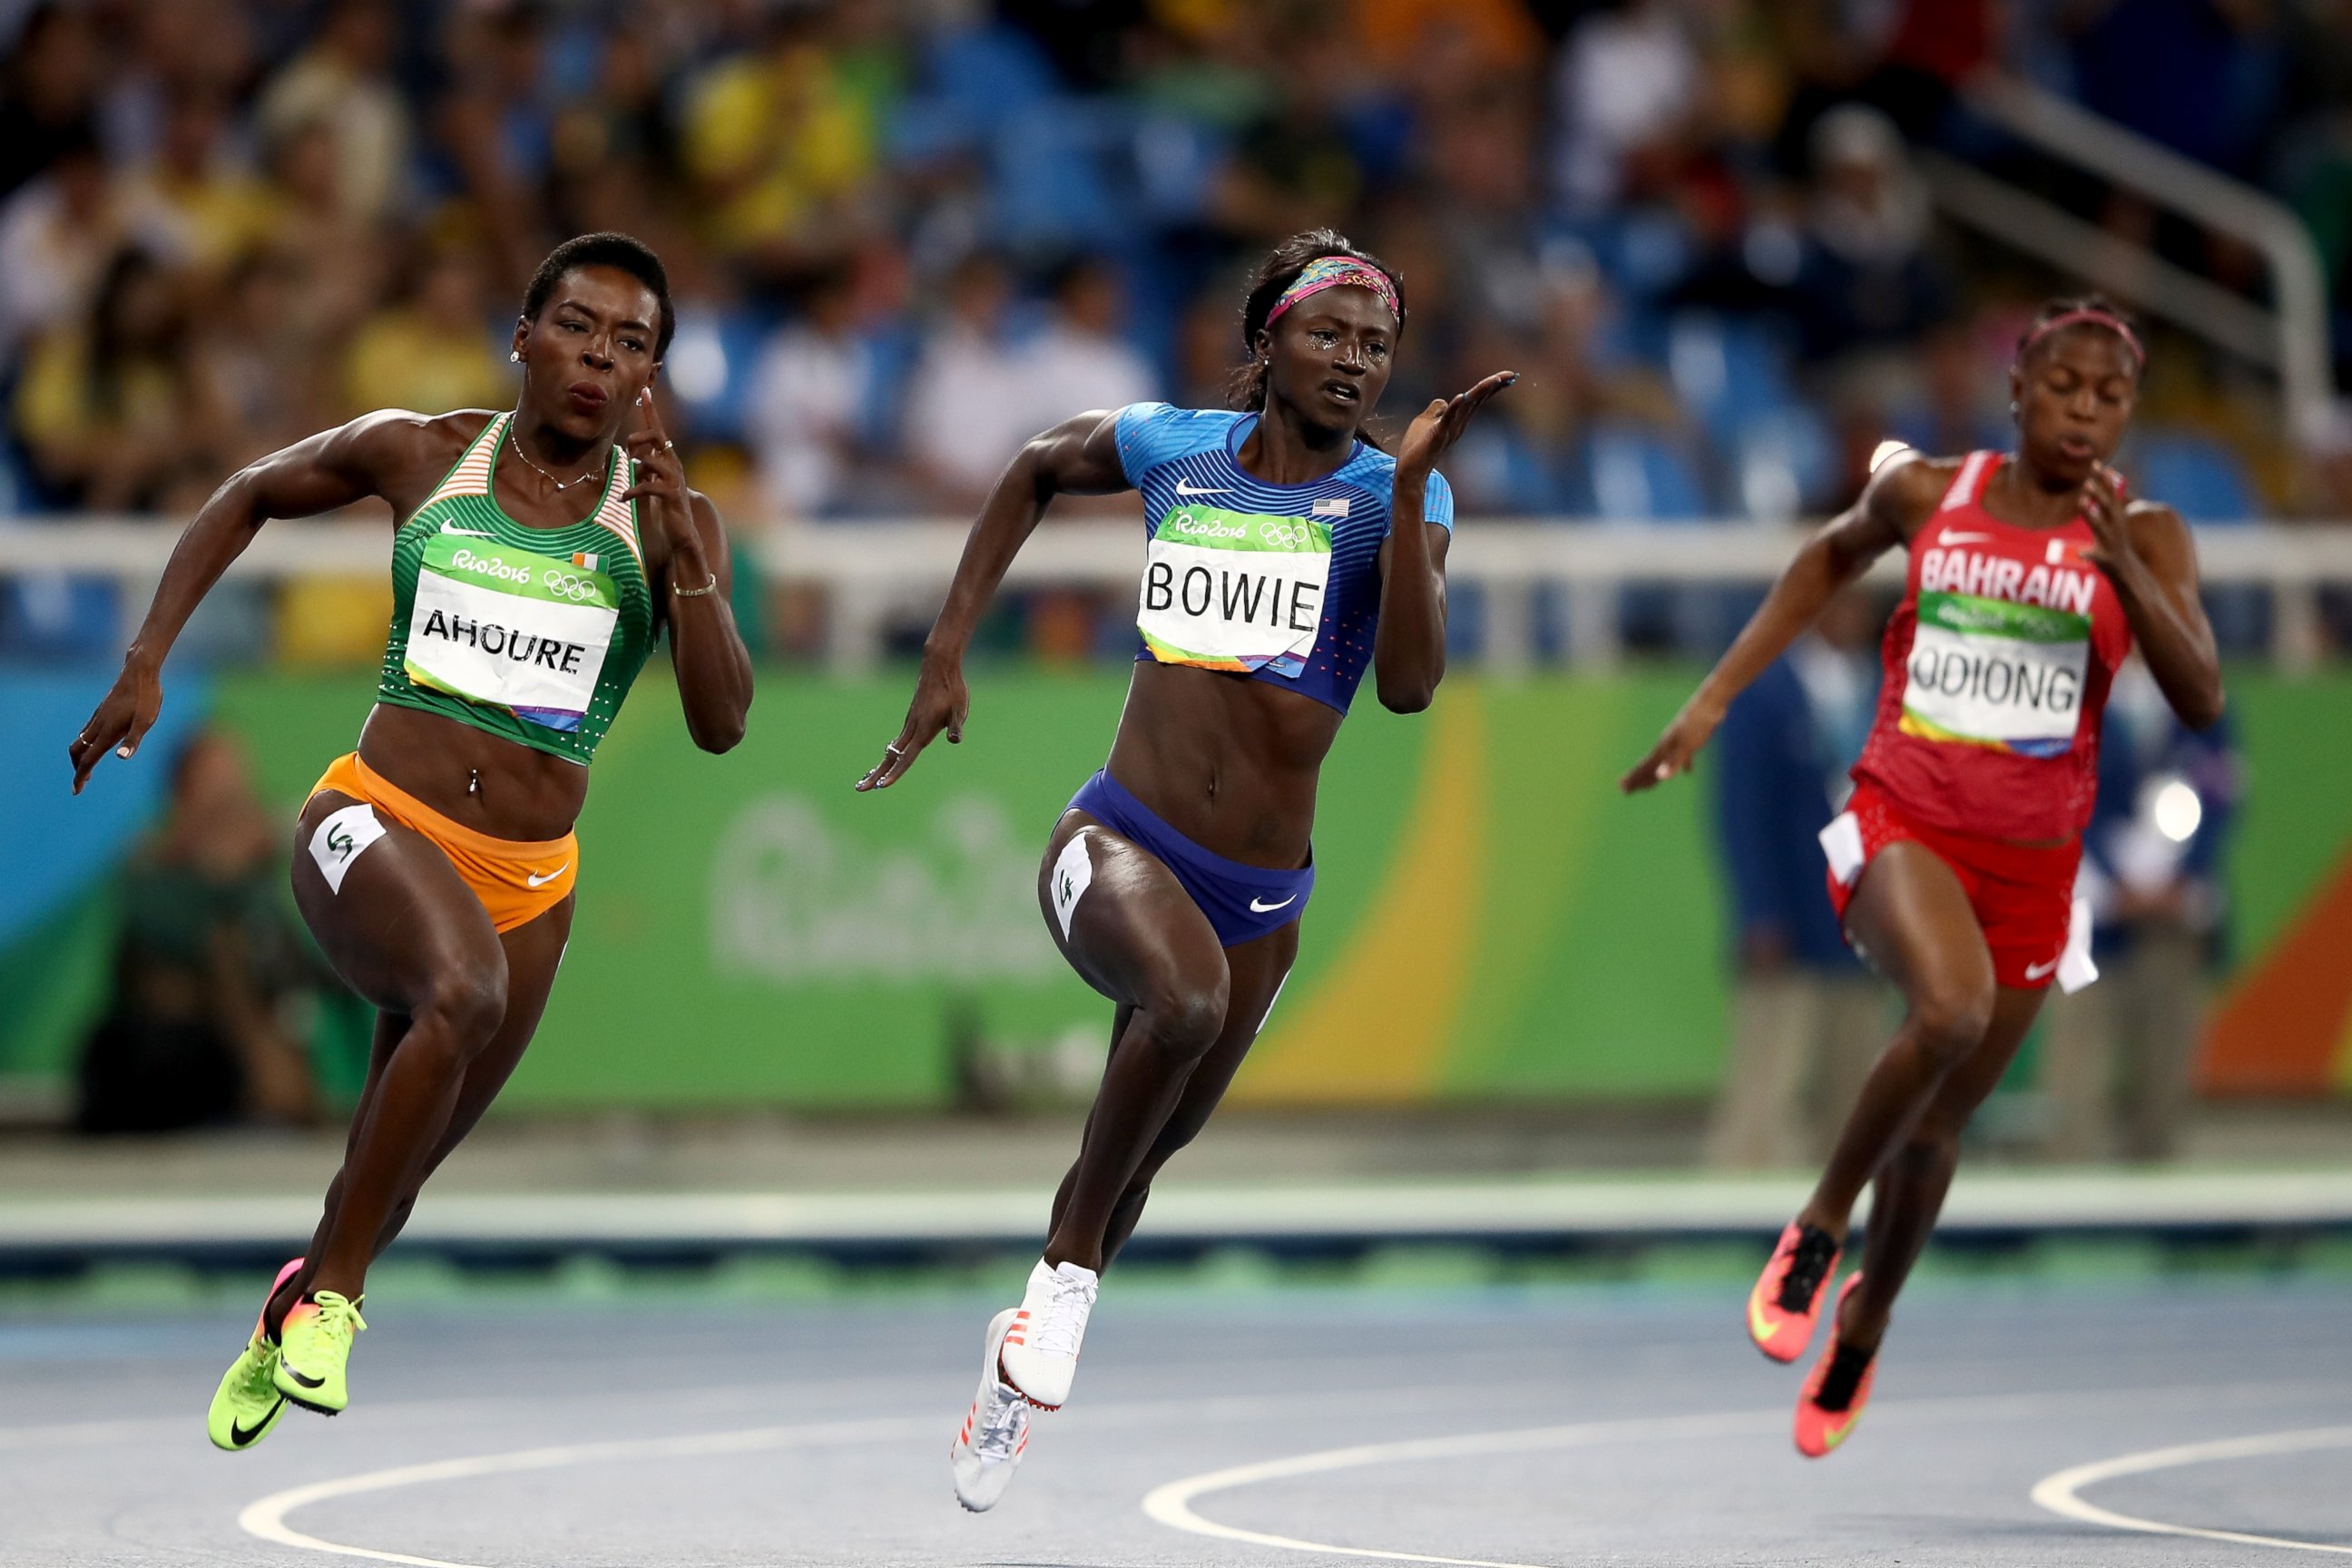 Why there is no Olympics women's decathlon